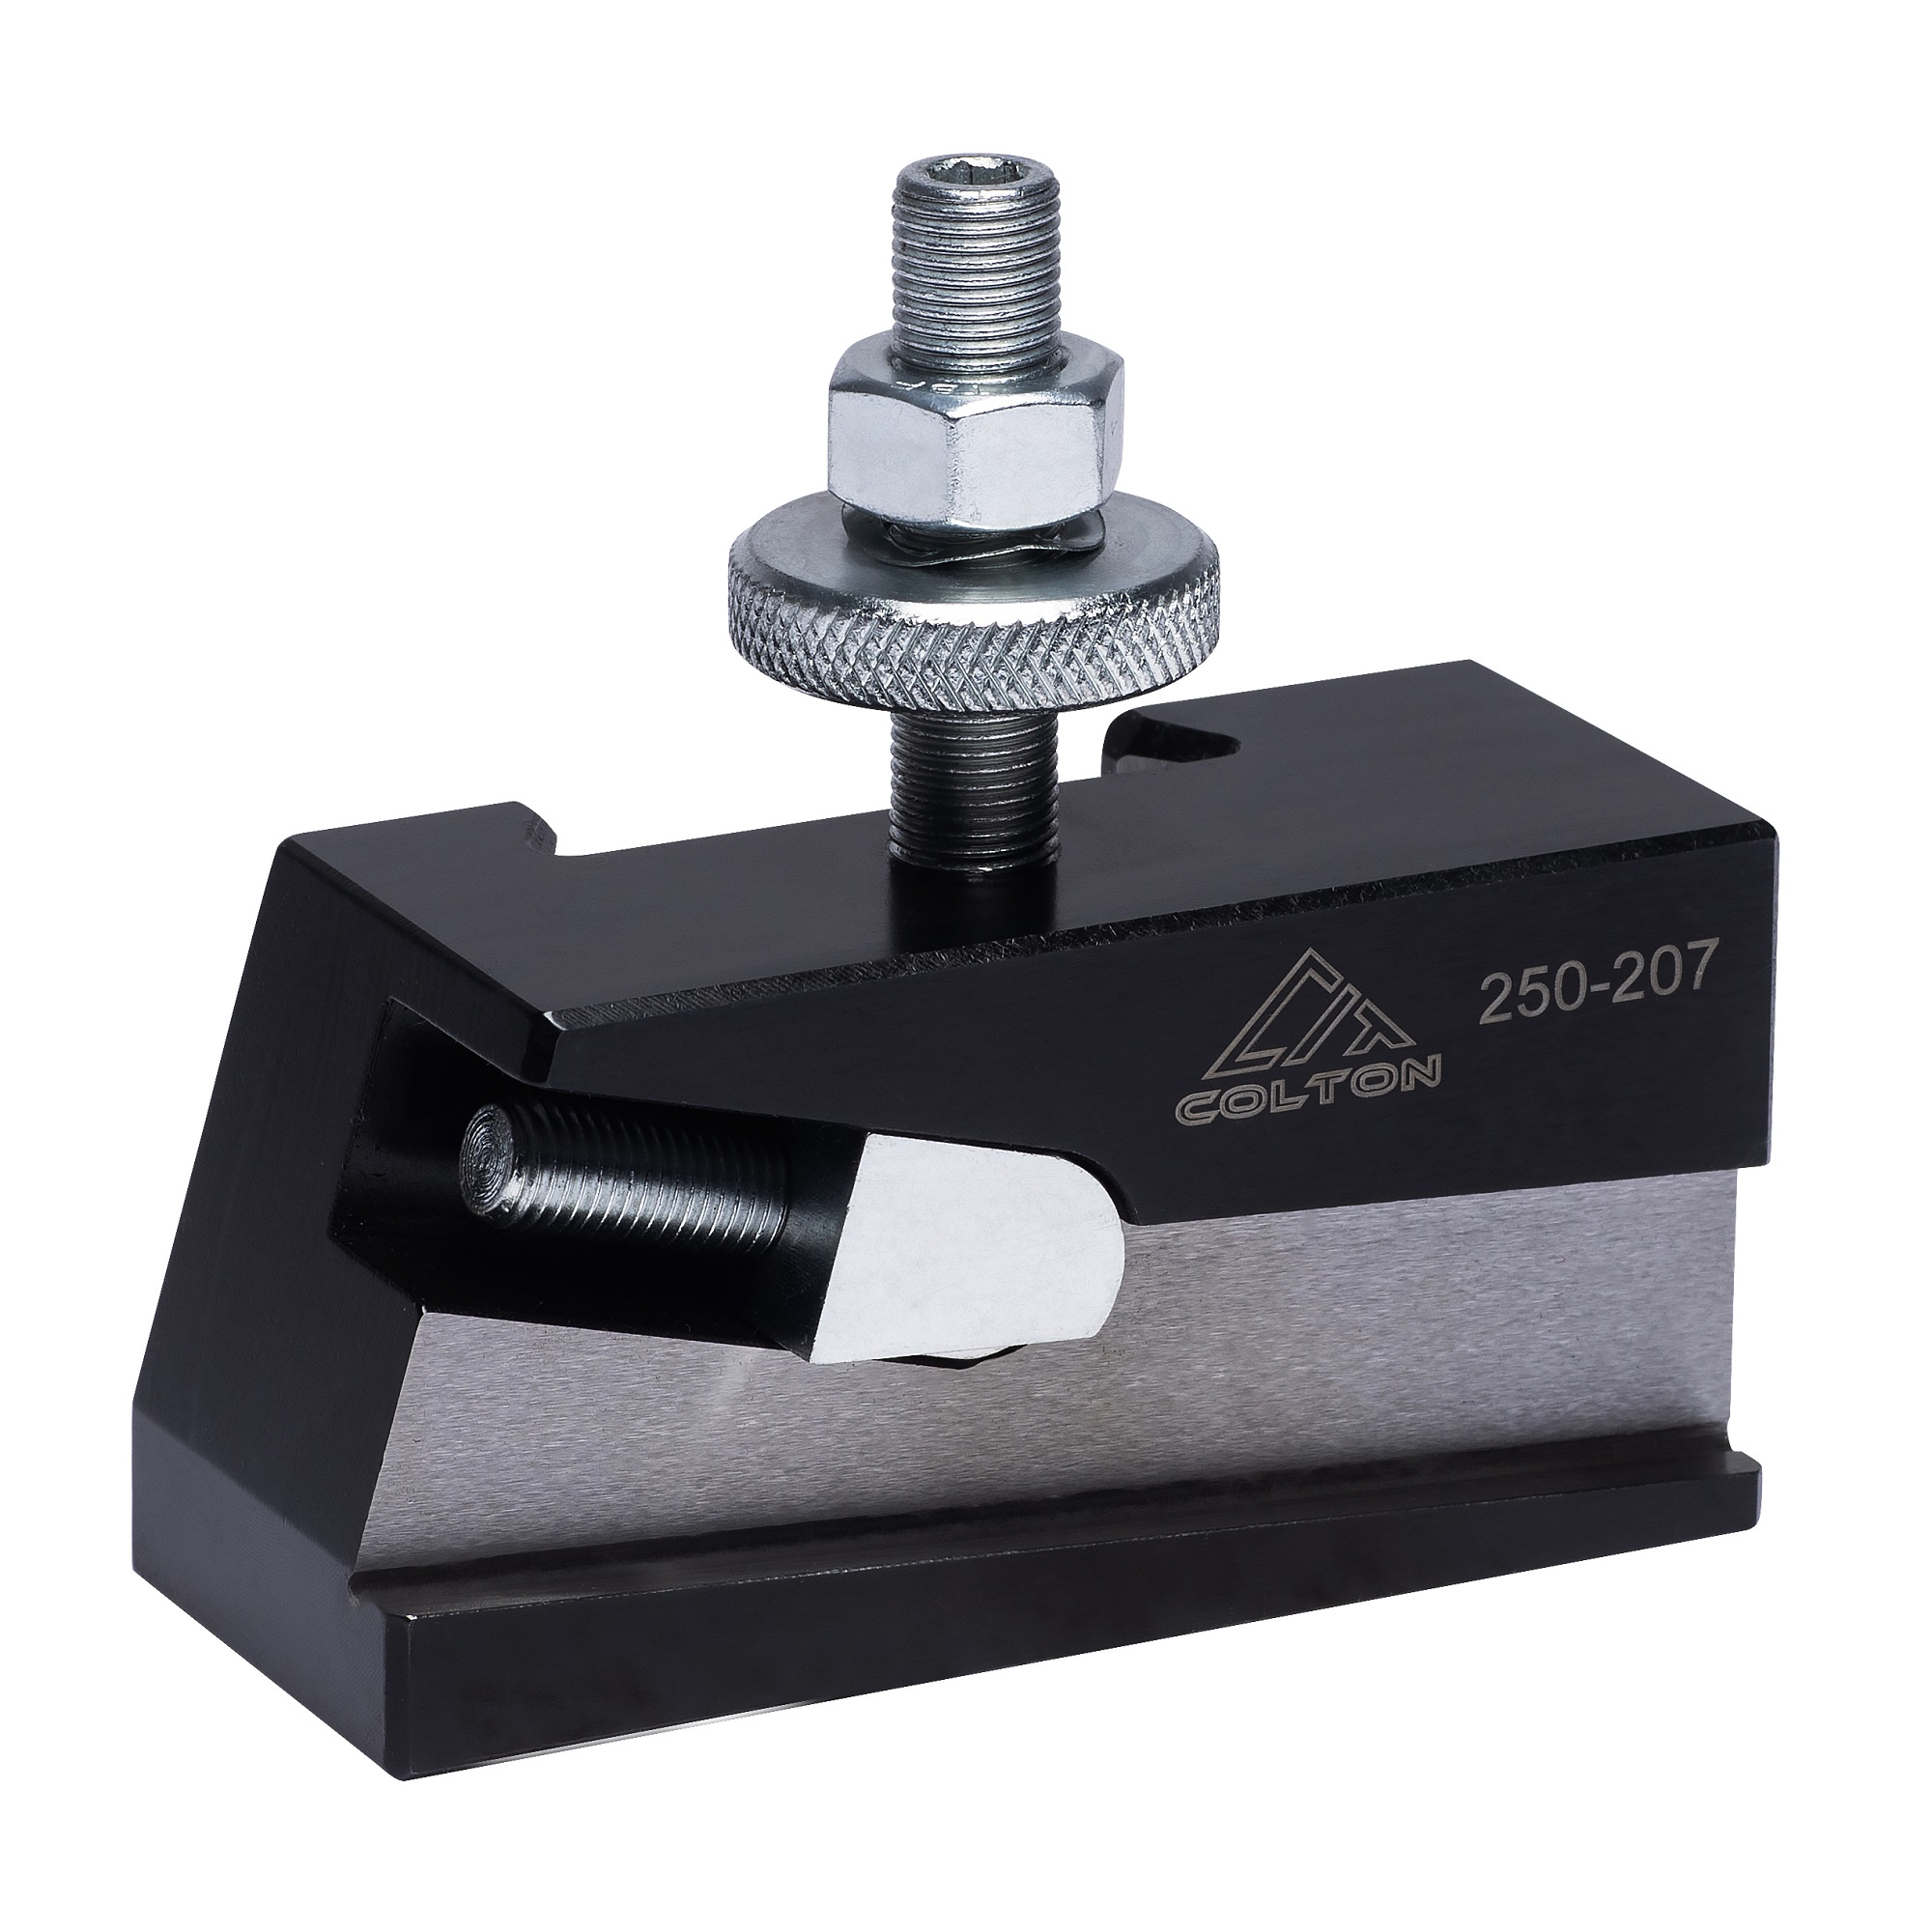 ProTool Multi-Cut XP-1 Cutting Tool Ronan (55-16): Other Specialty Tools